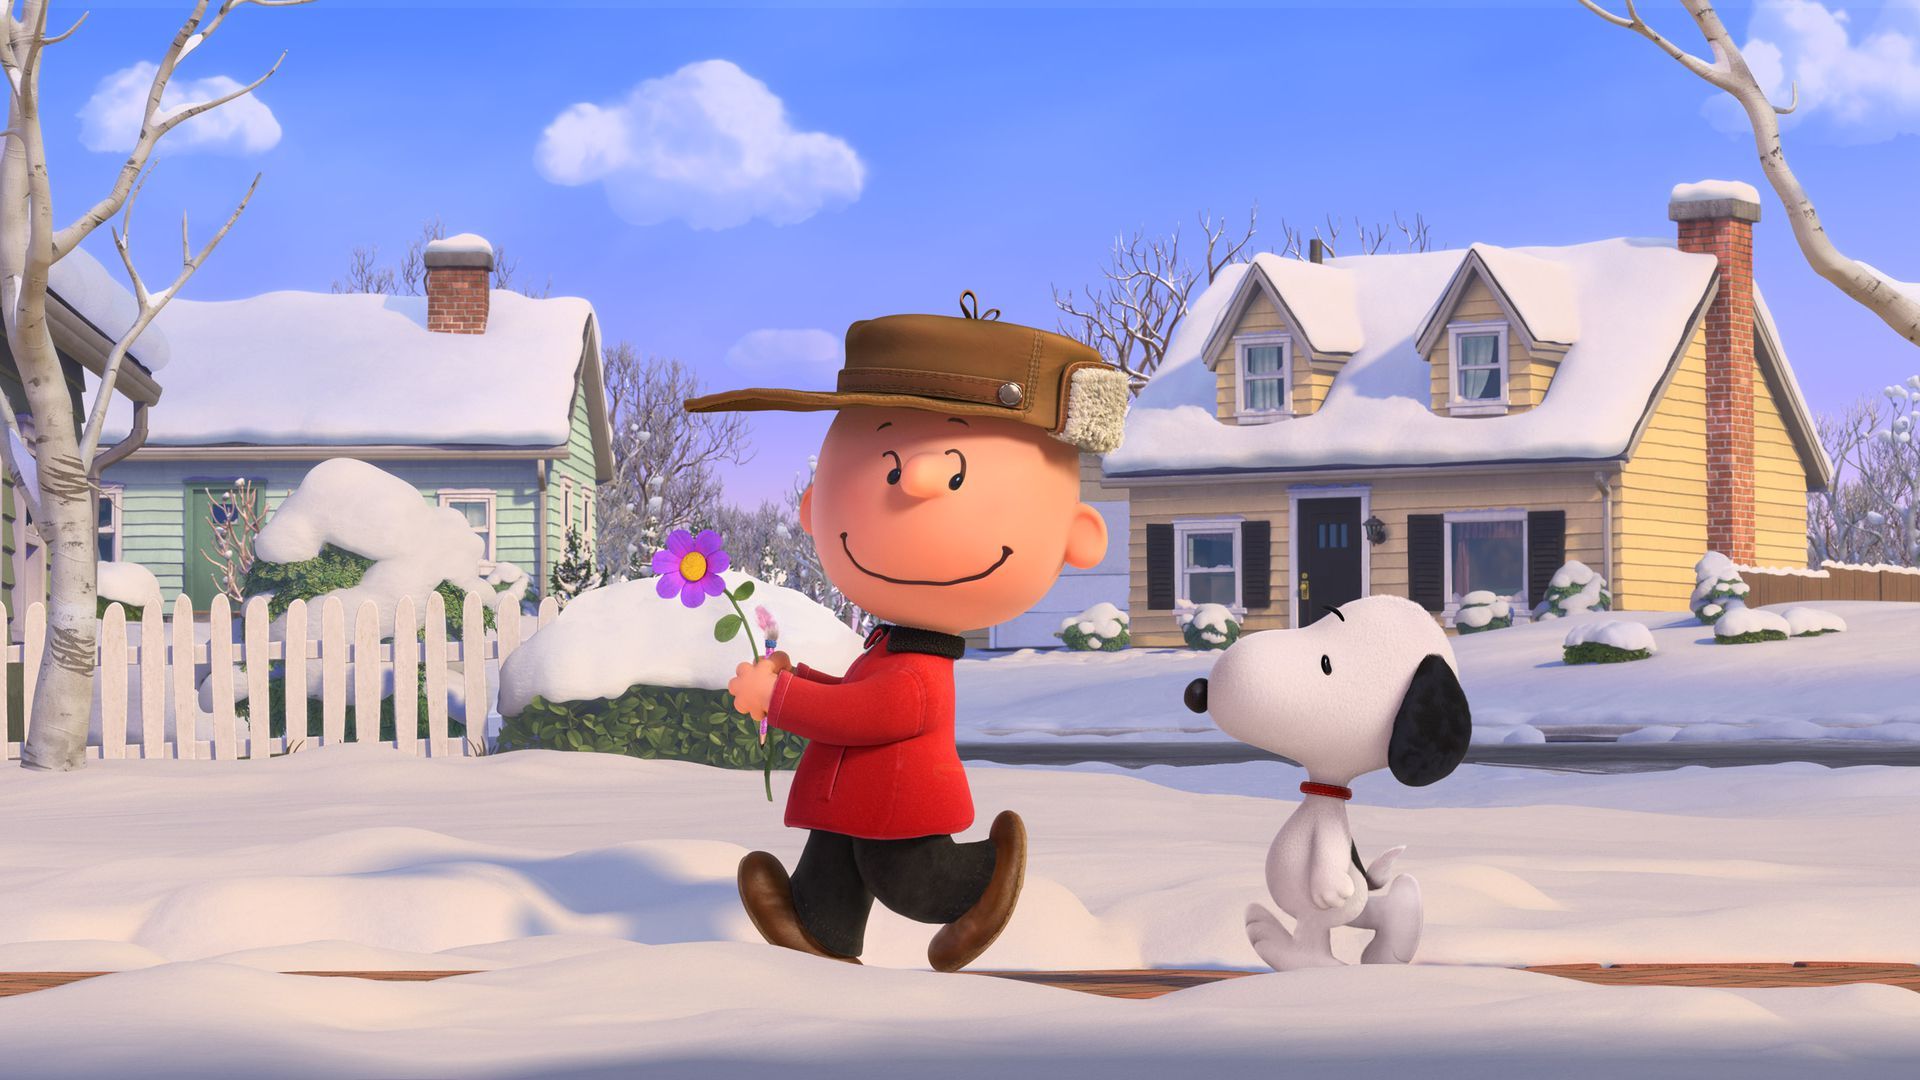 THE PEANUTS MOVIE Now on Digital HD Coming to Blu ray & DVD